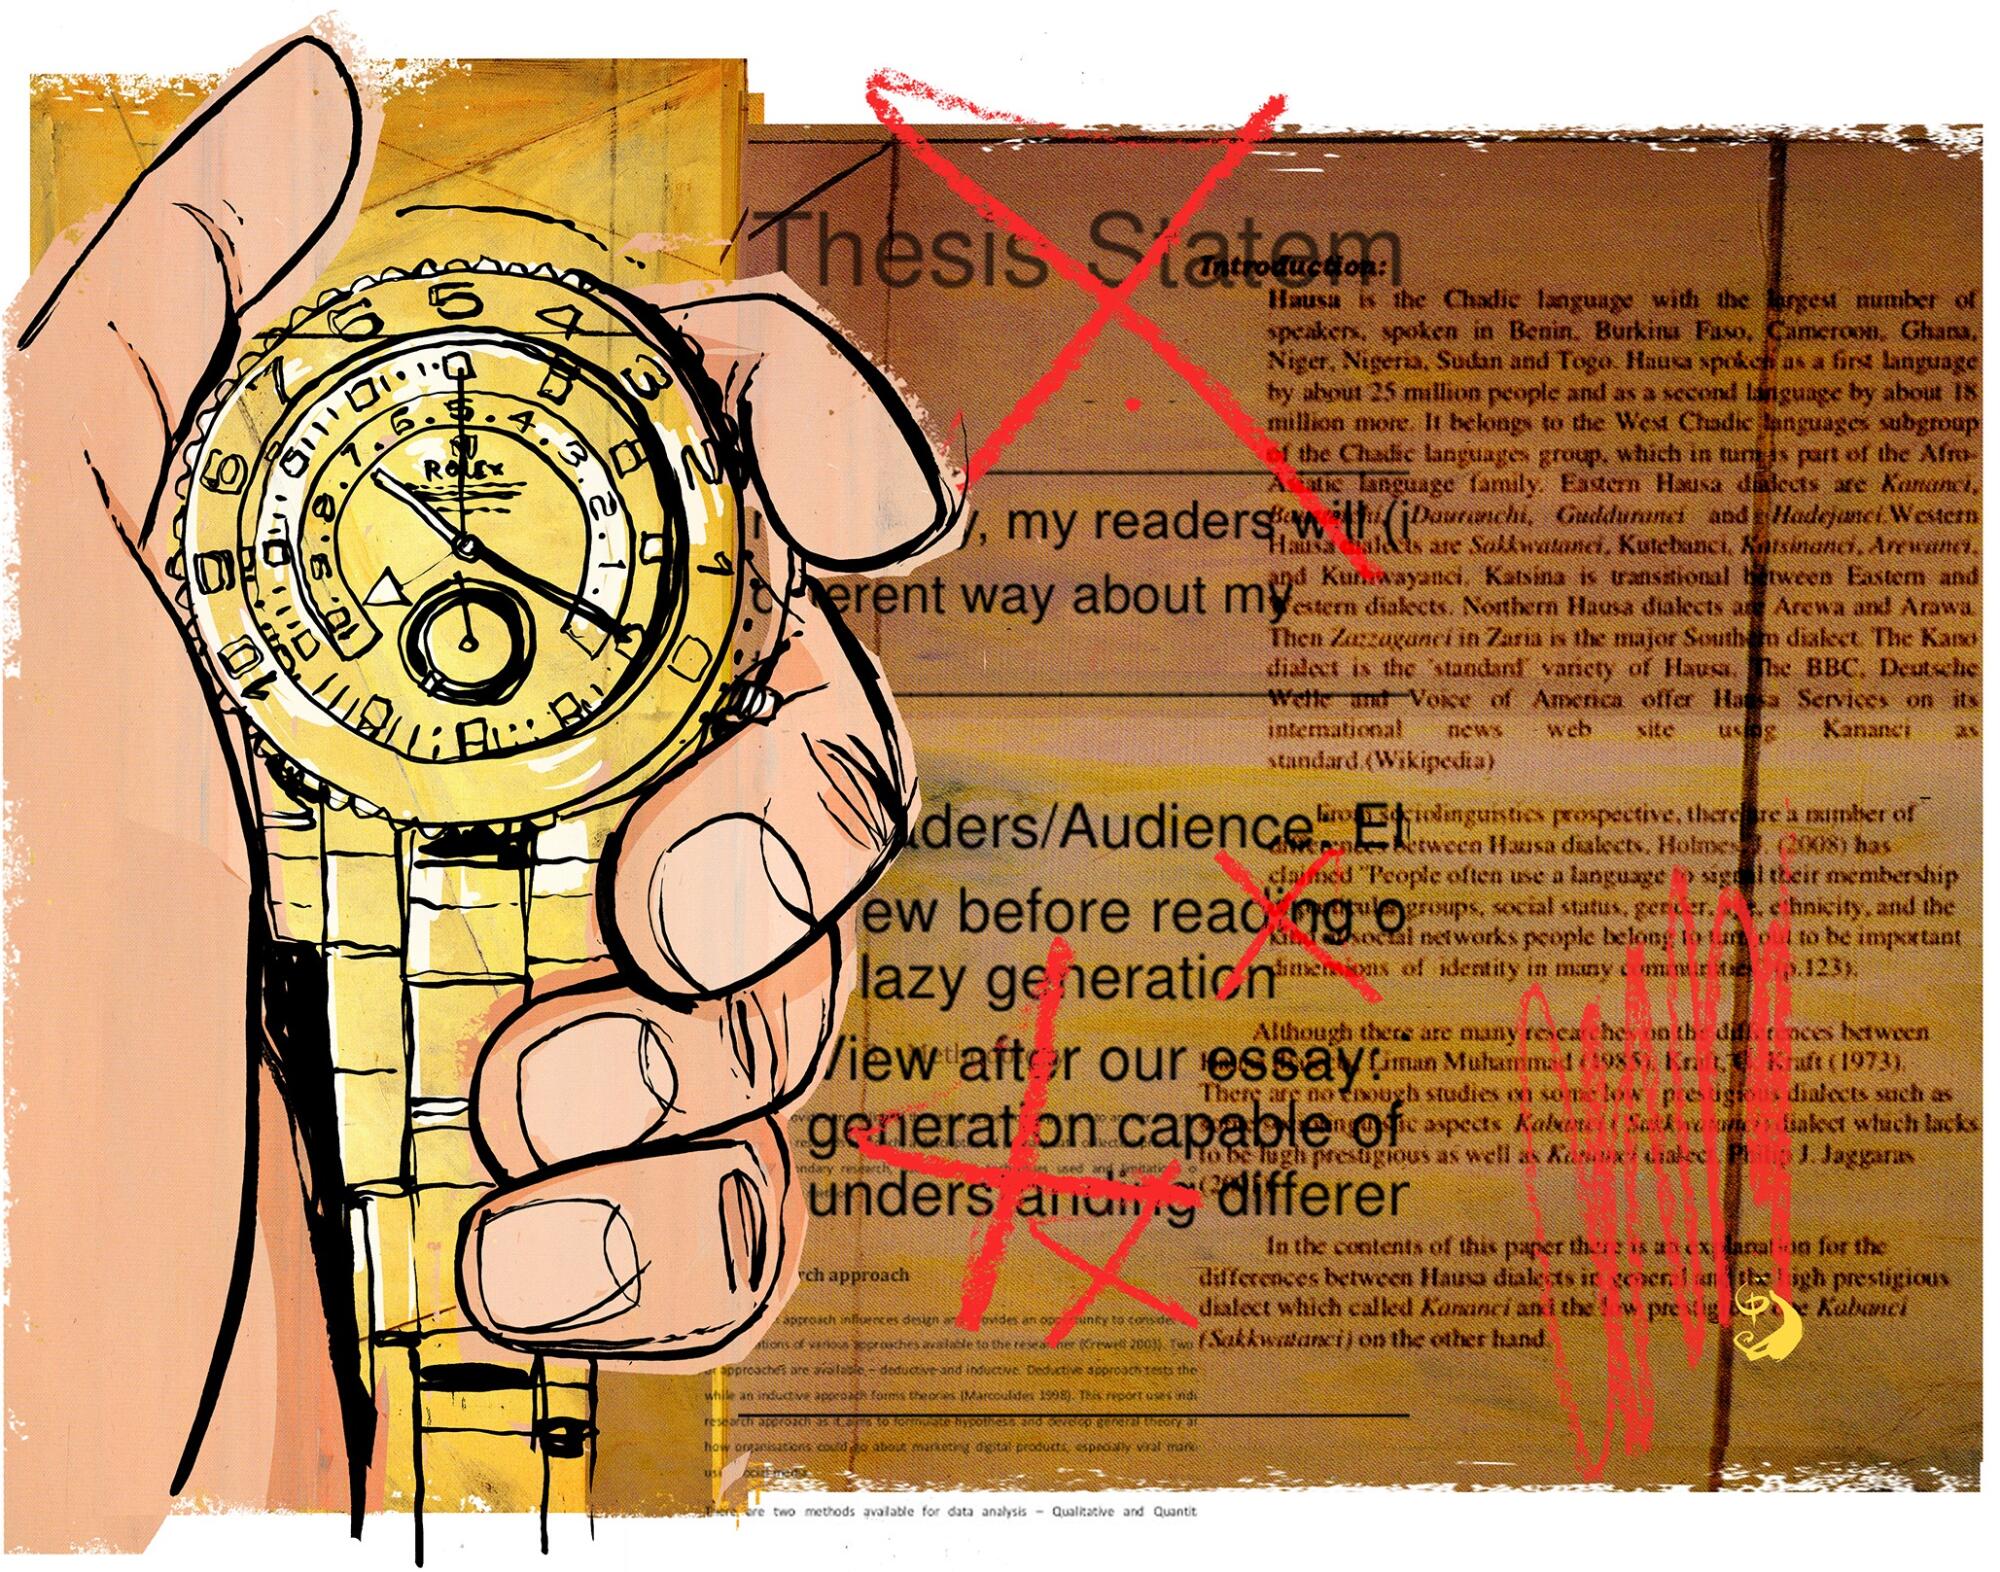 Illustration of a Rolex watch and academic papers.